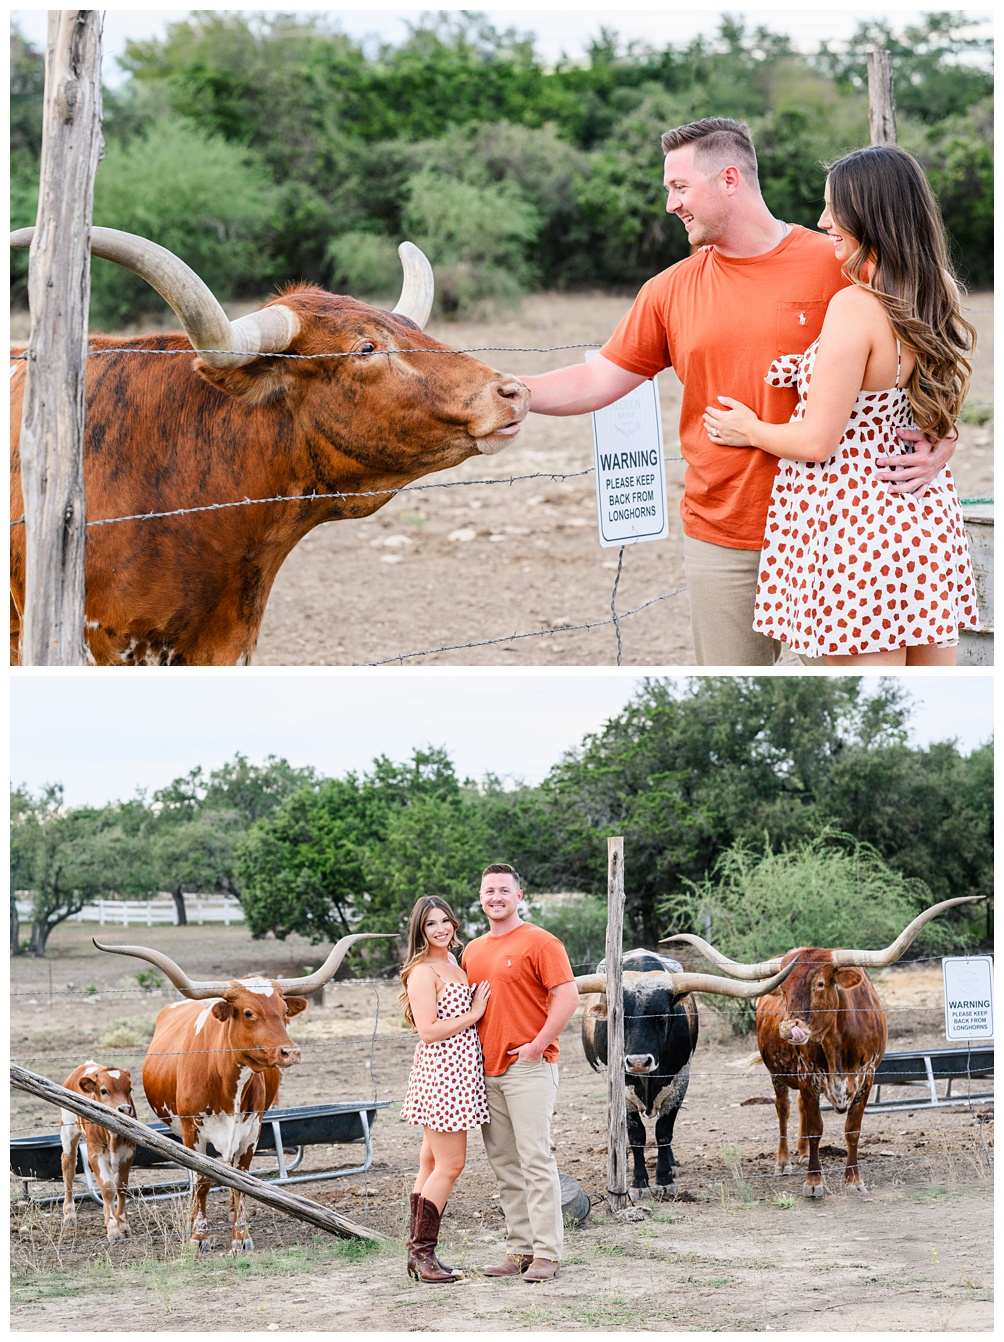 Wedding Venues with longhorns on property for University of Texas fans